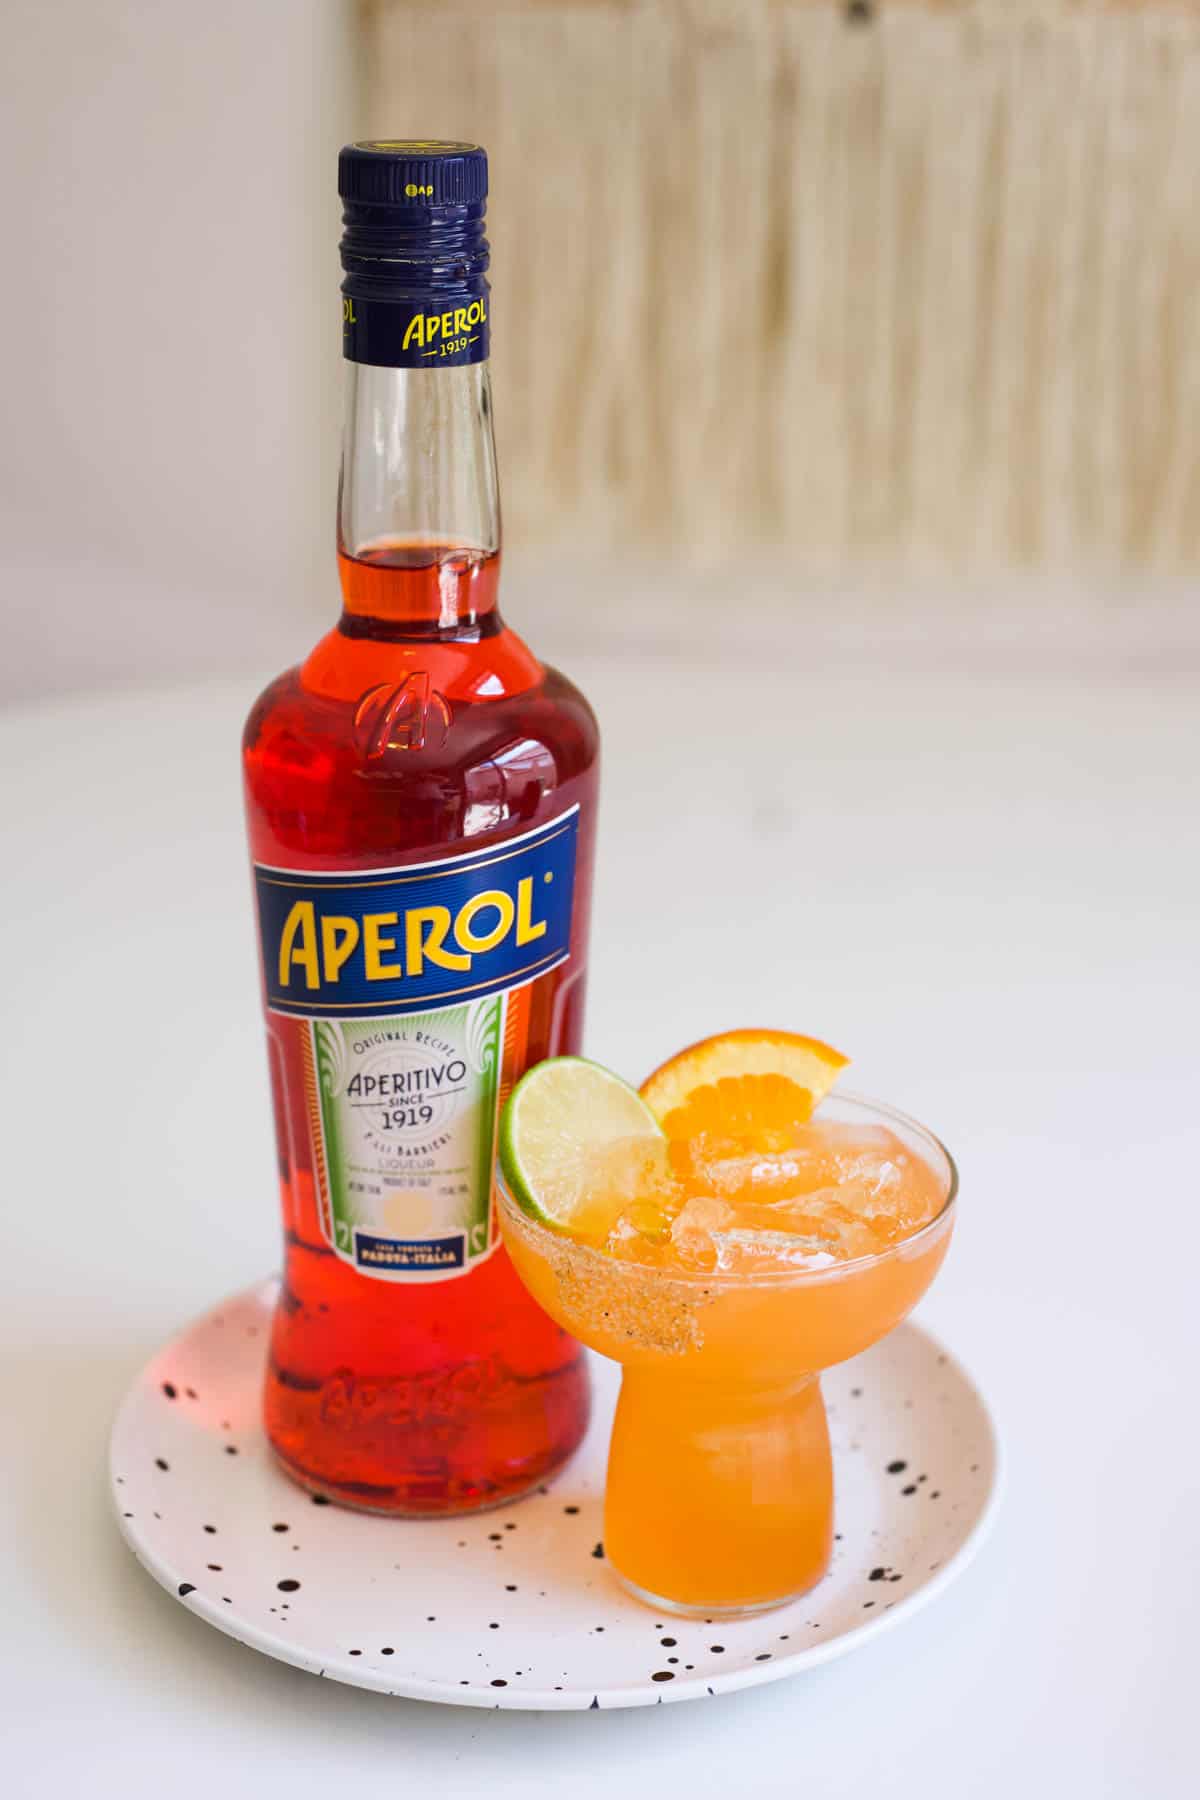 A bottle of Aperol on a small tray next to a cocktail glass with an Aperol Margarita.